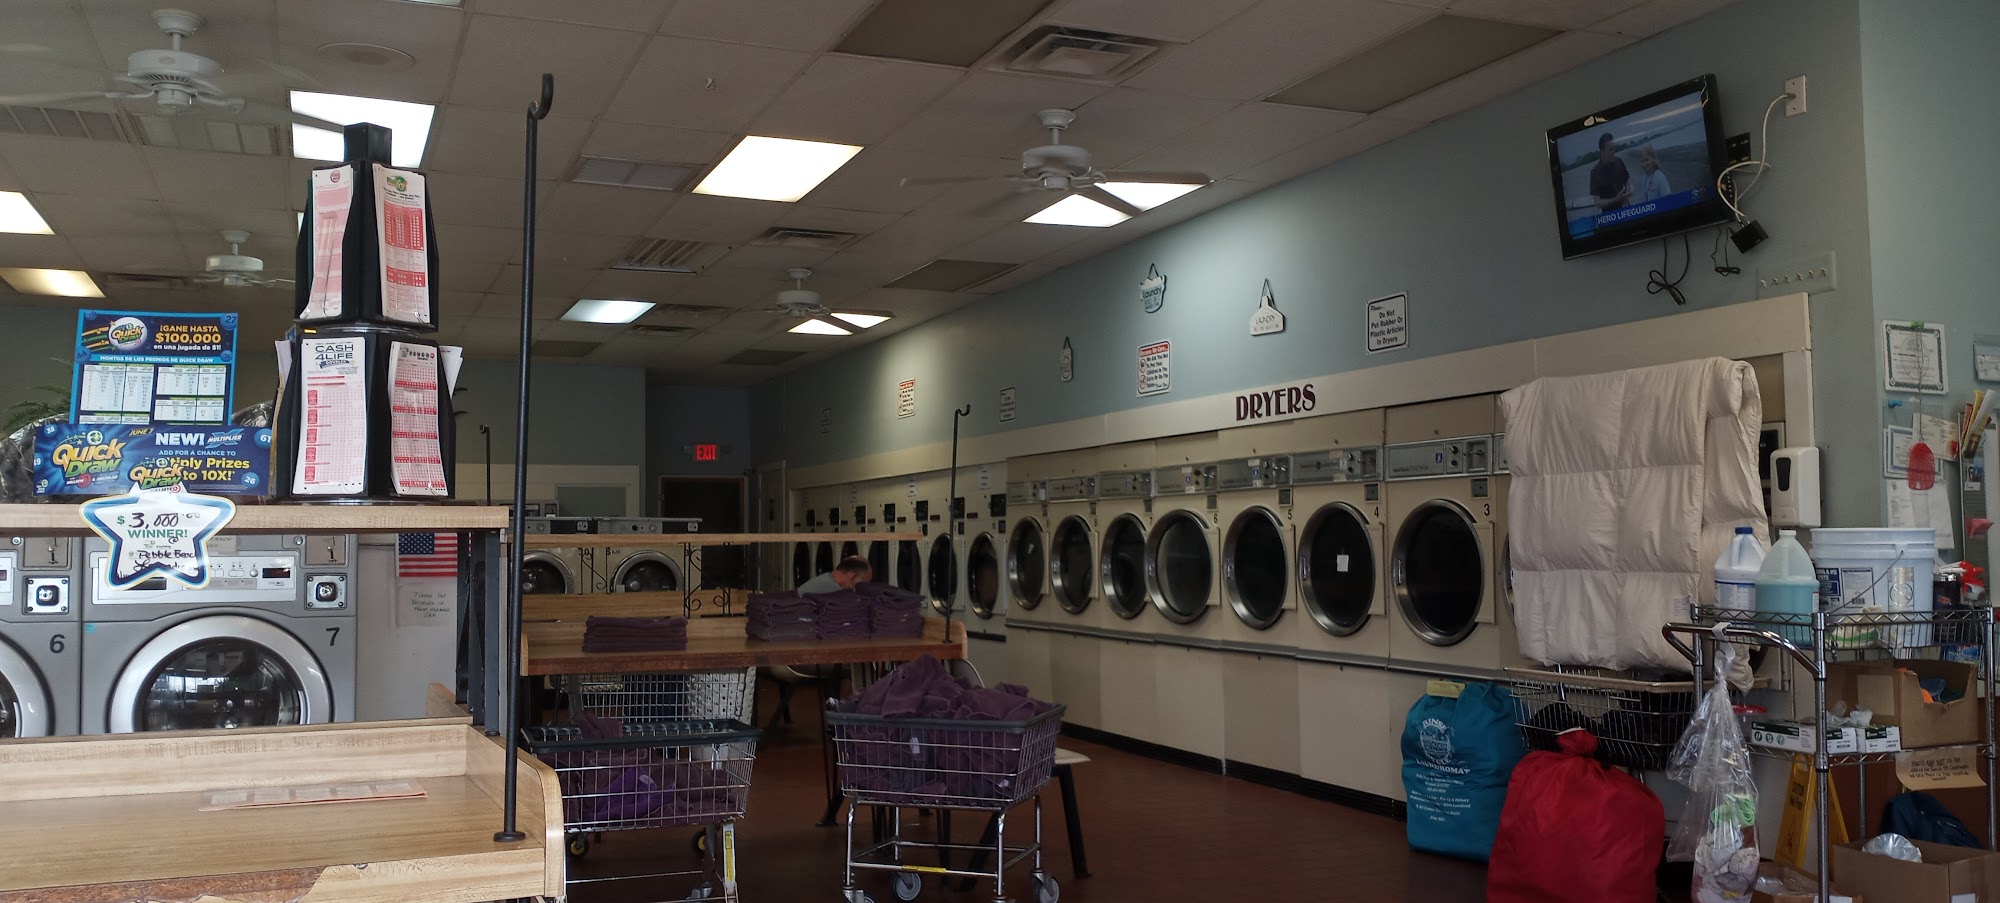 Pebble Beach Laundromat & Dry Cleaners